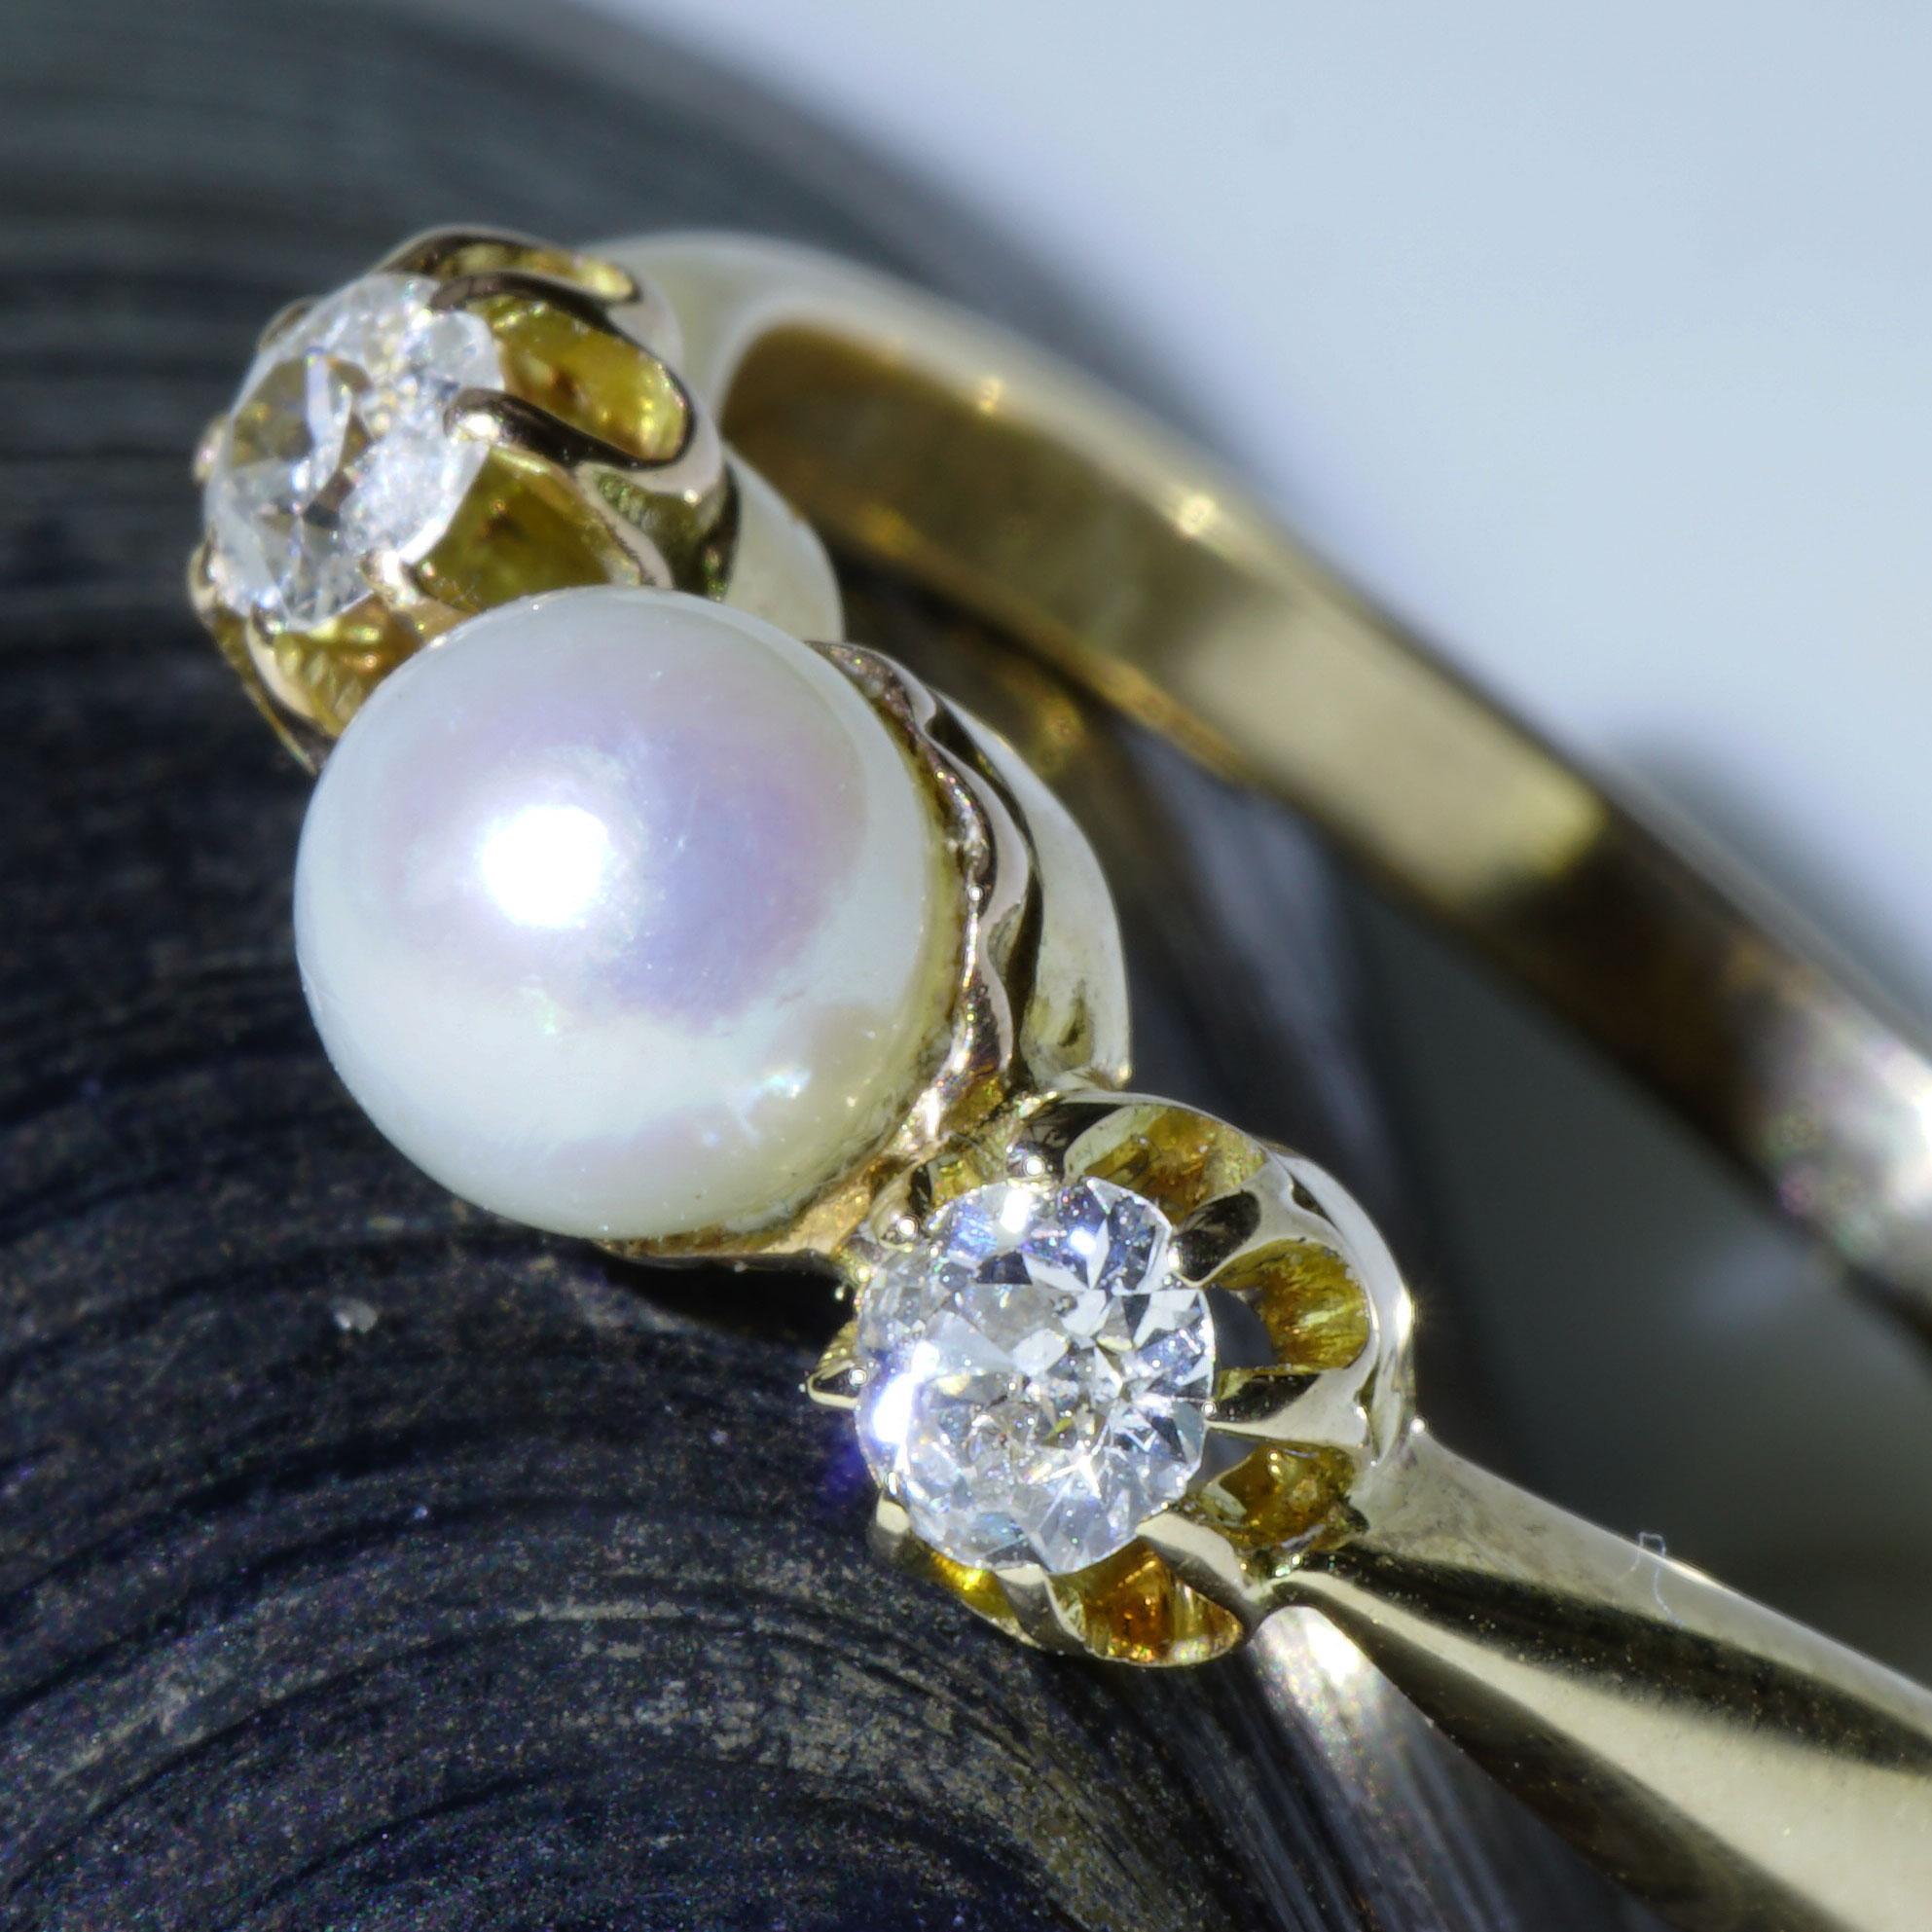 Old Cut Diamond Pearl Ring 0.20 ct Yellow Gold about 1910 fine white/pink Pearl For Sale 4